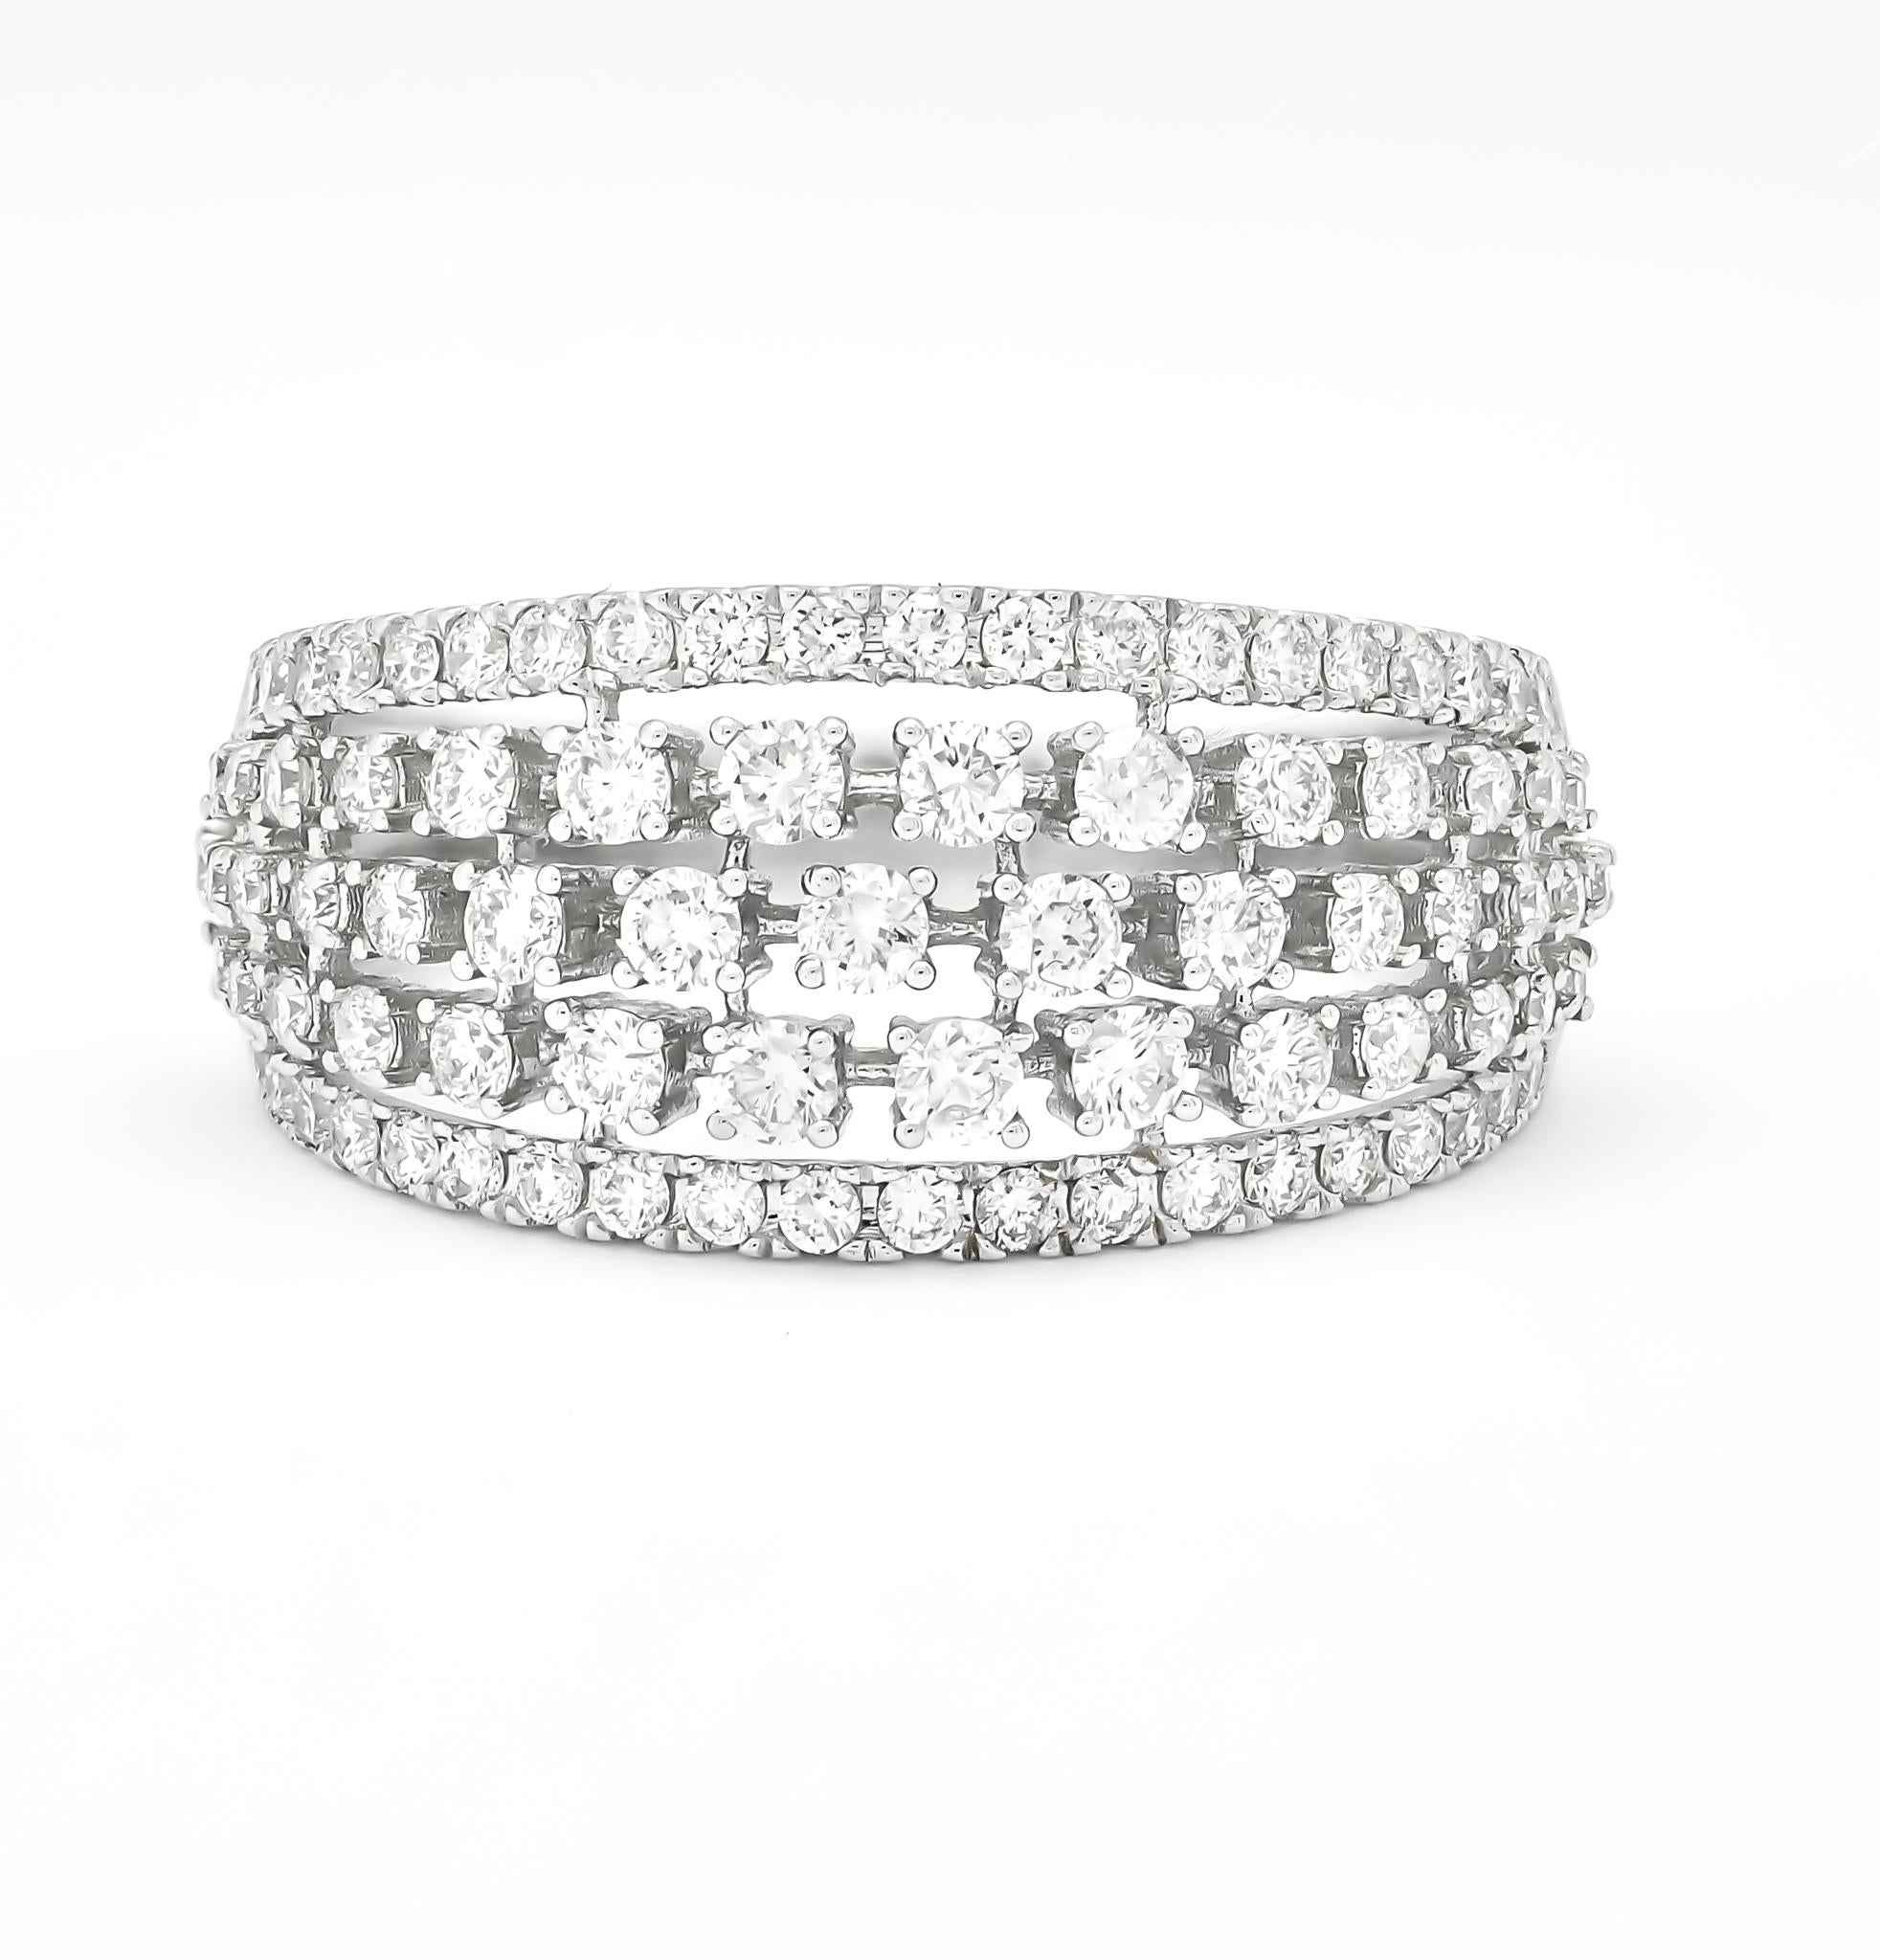 Introducing our exquisite Natural Diamonds 1.01 Ct 18 Karat Gold Multi Row Luxury Fashion Ring, a true masterpiece that captures the essence of timeless elegance and unparalleled beauty. This stunning piece of jewelry is a celebration of